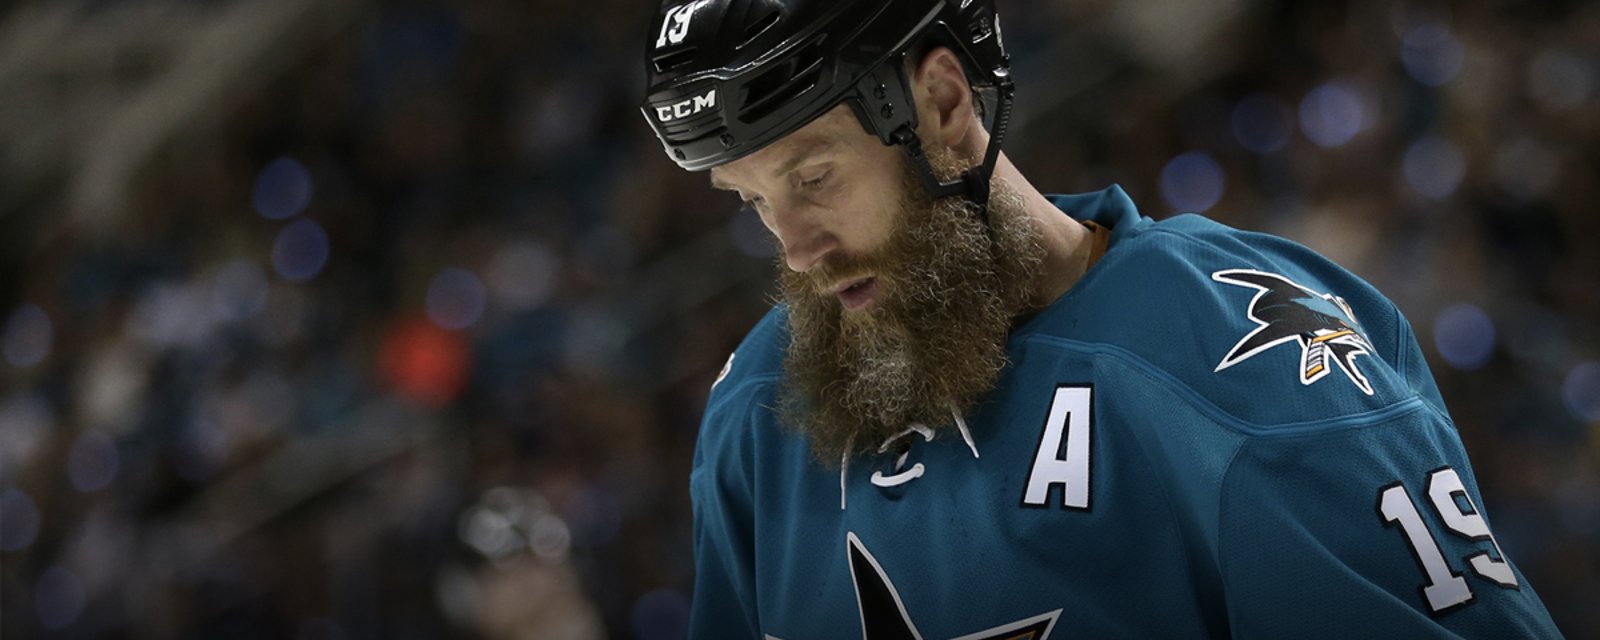 Breaking: NHL Player Safety Department punishes Thornton for “vicious” slash